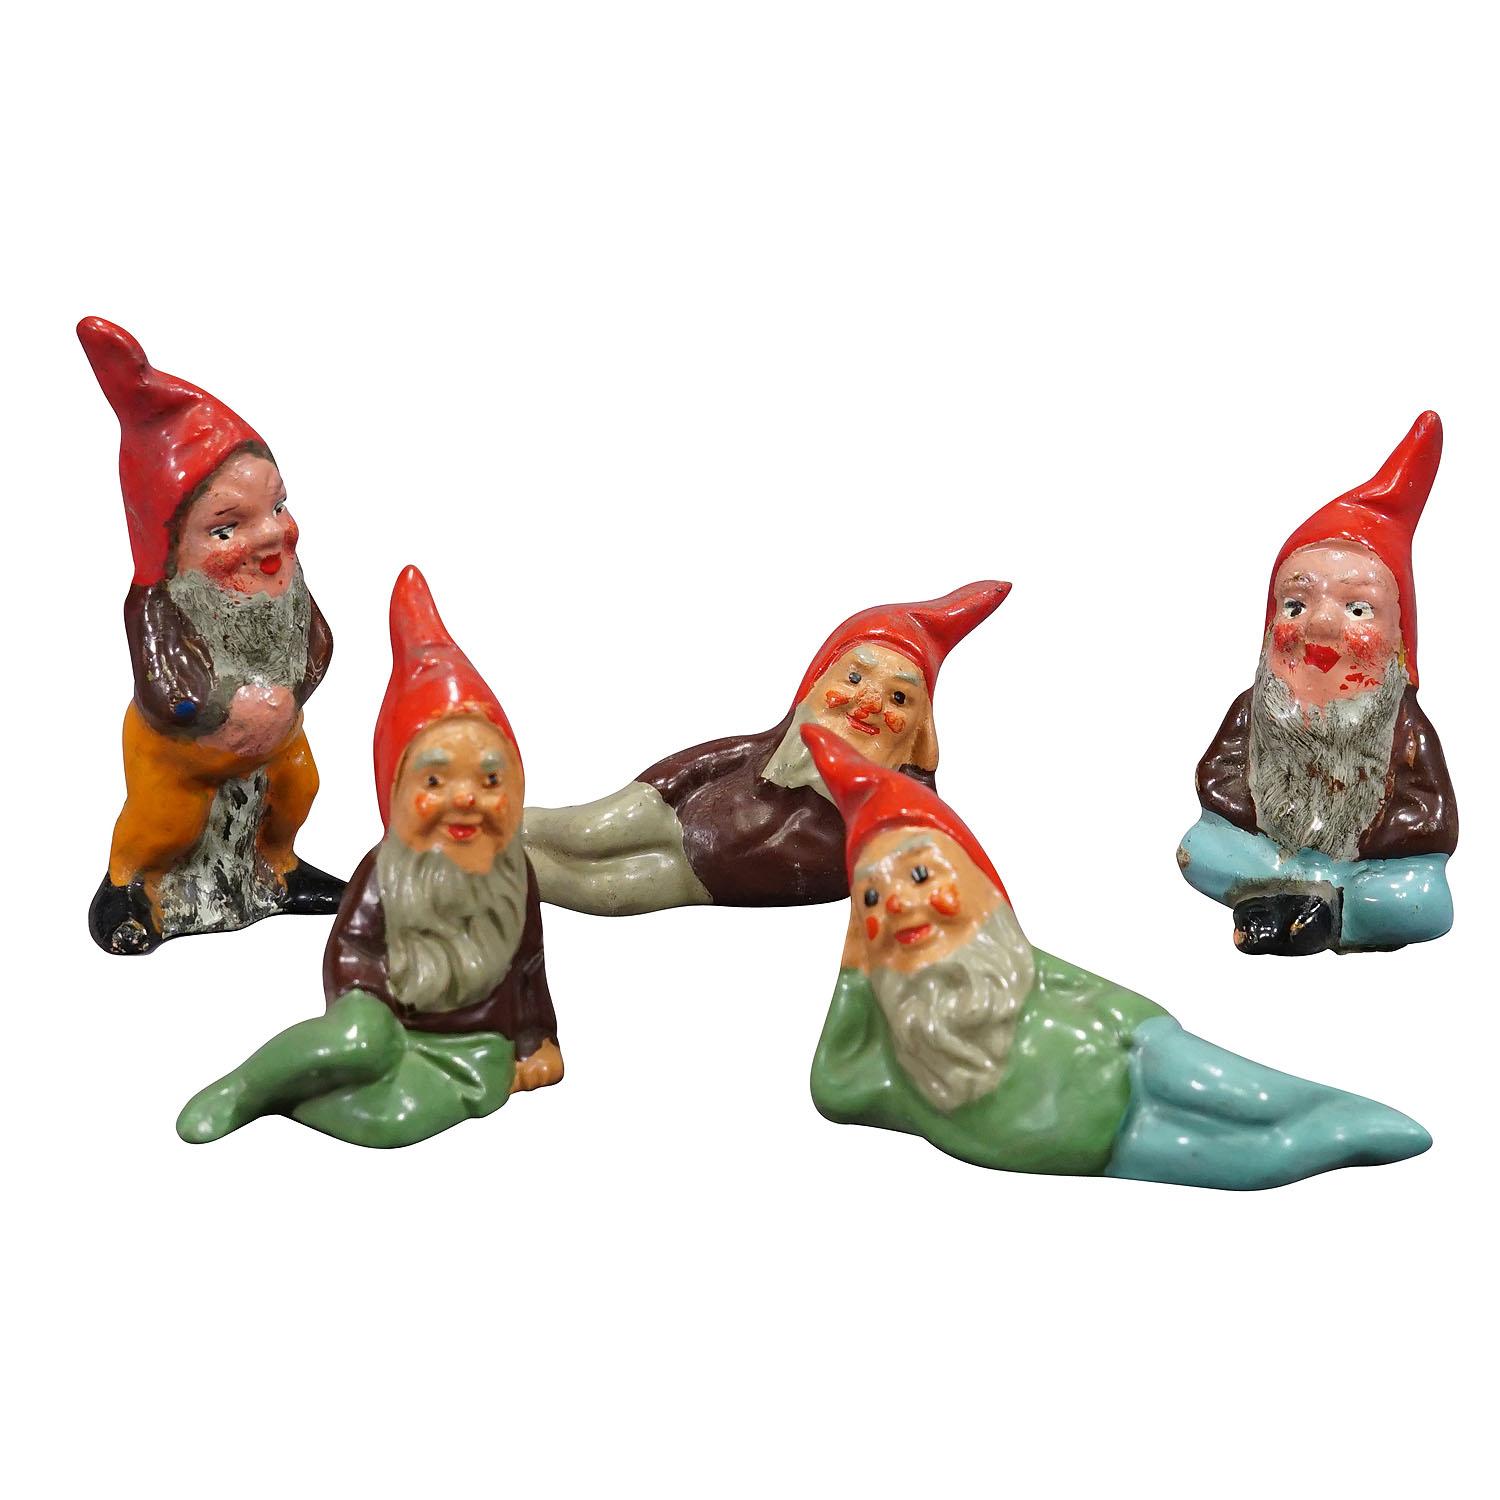 Five Tiny Terracotta Garden Gnomes, Germany ca. 1950s

A whimsy set of five tiny garden gnomes made in Germany ca. 1950s probably by Heissner. They are made of terracotta and hand-painted with bright colors. Good used vintage condition with signs of